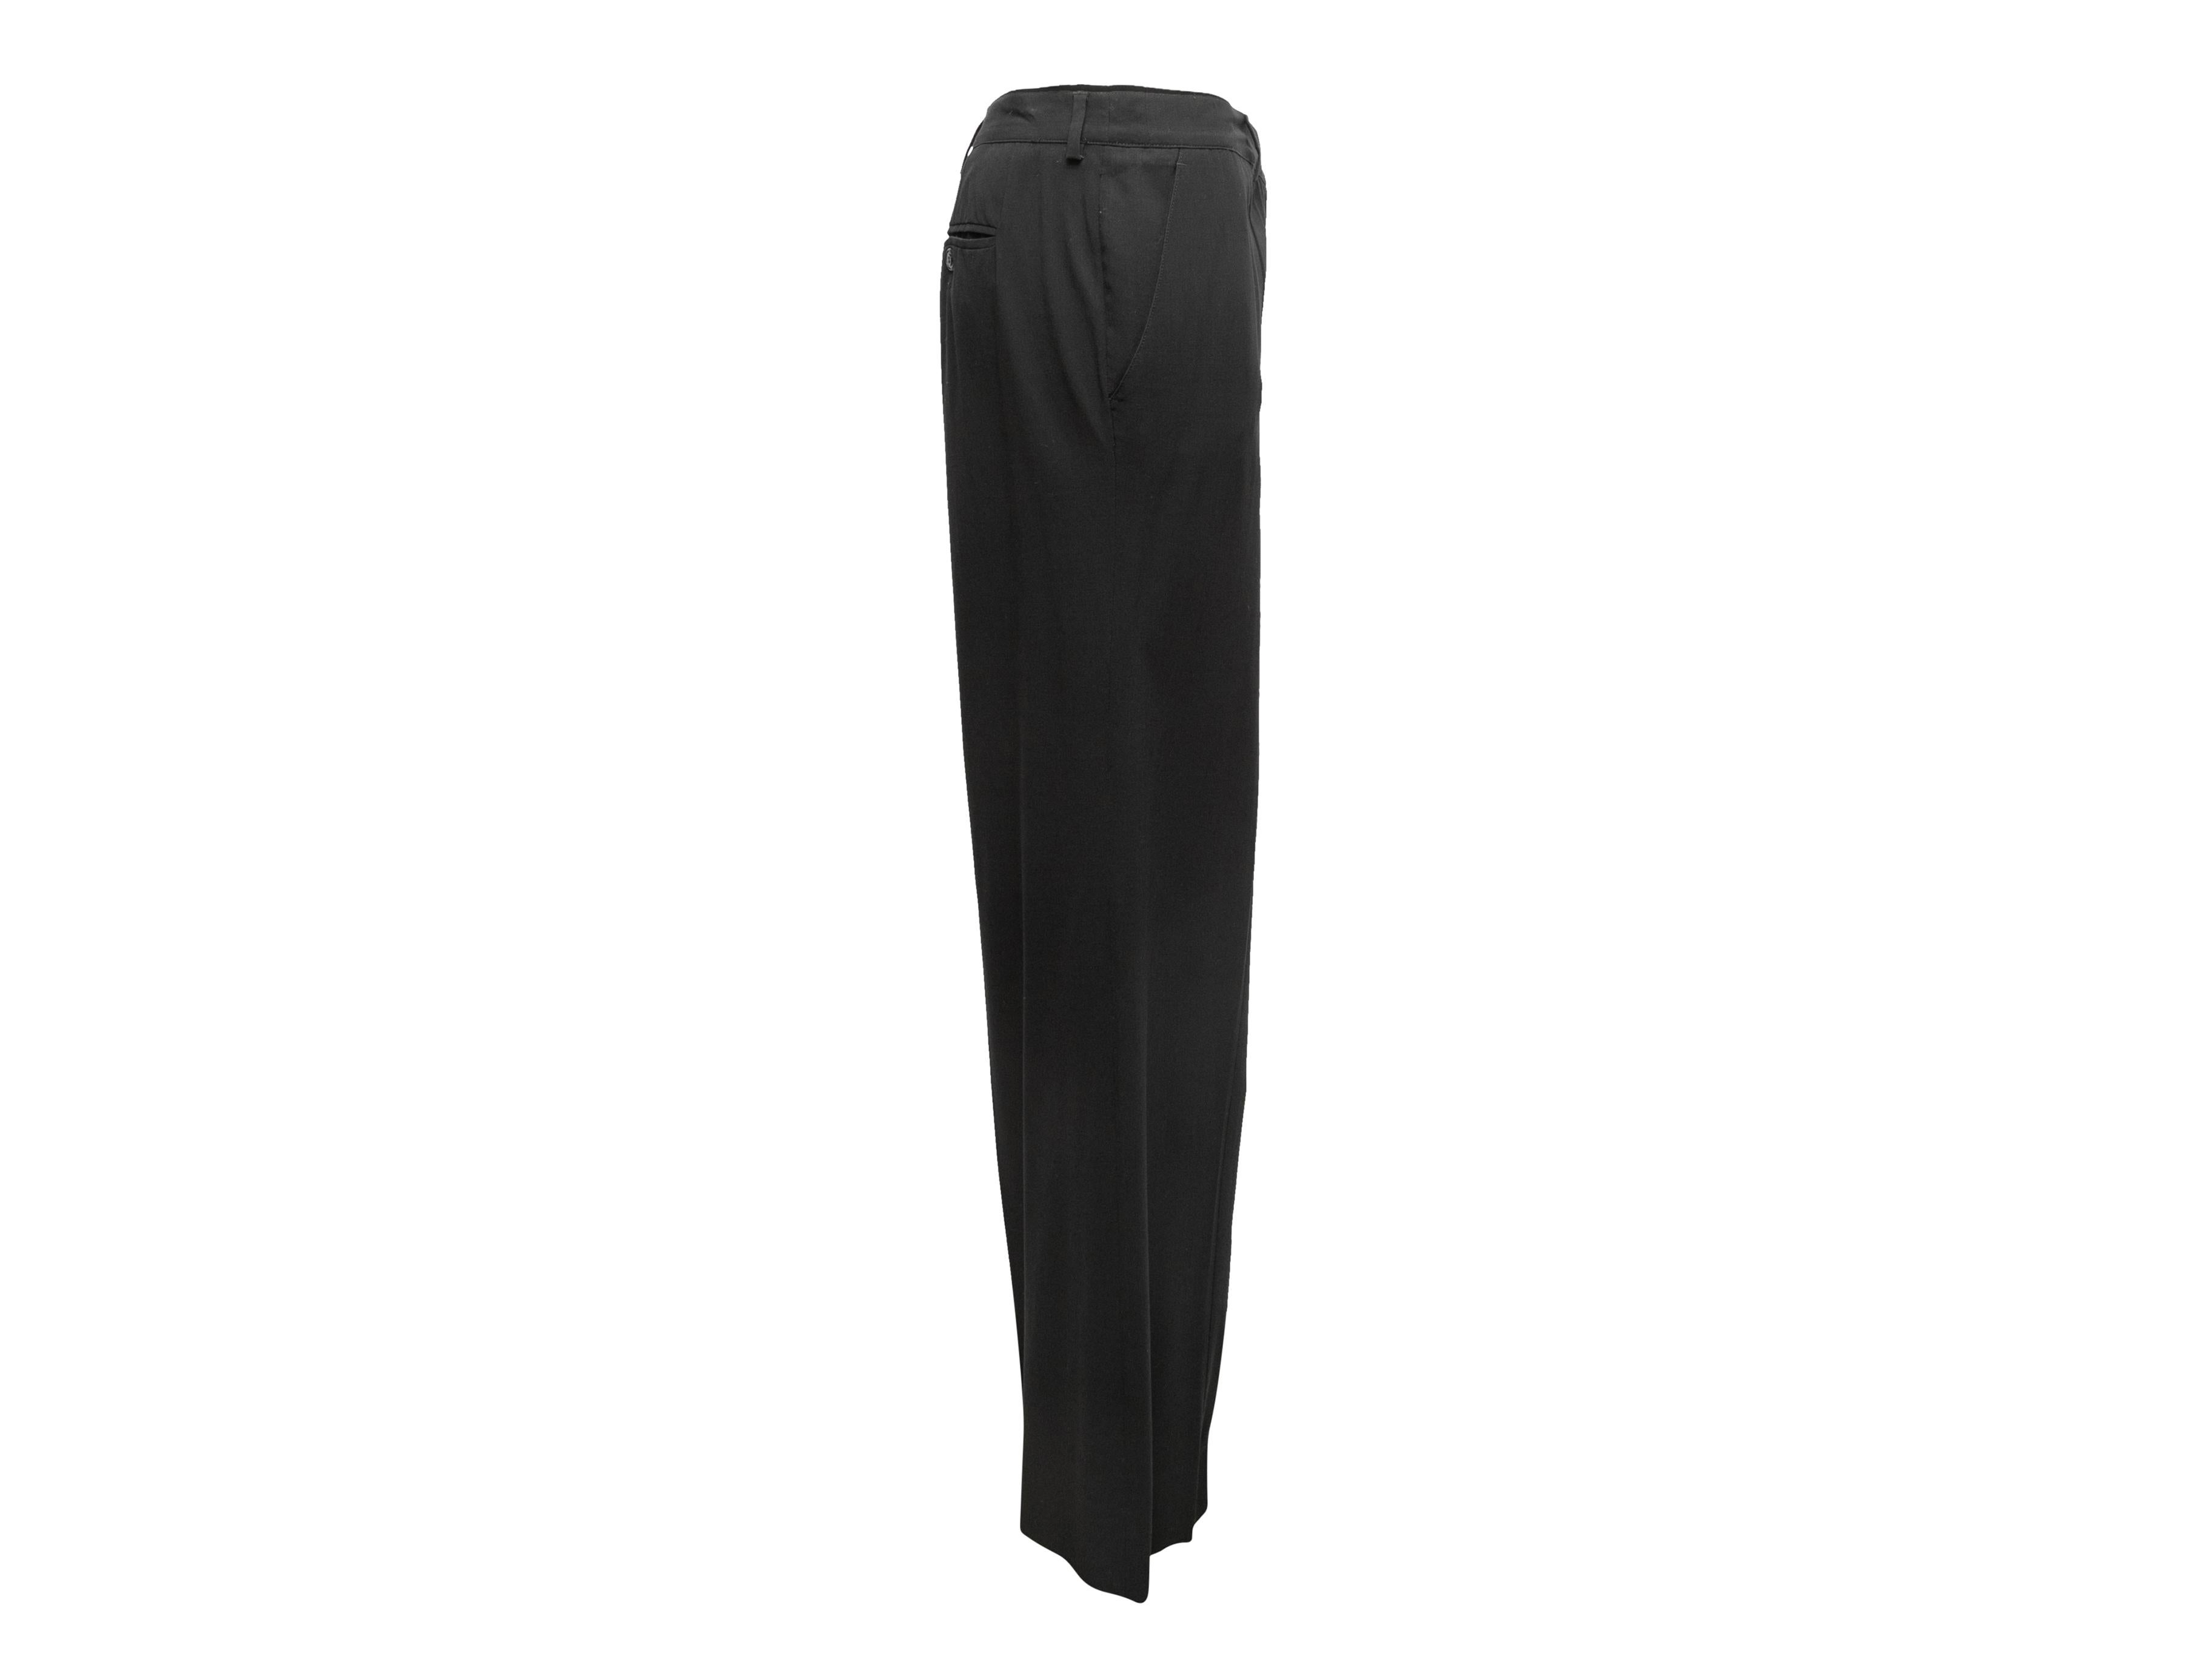 Vintage black wool trousers by Chanel. From the Spring/Summer 2003 Collection. Three pockets. Zip closure at front. 39